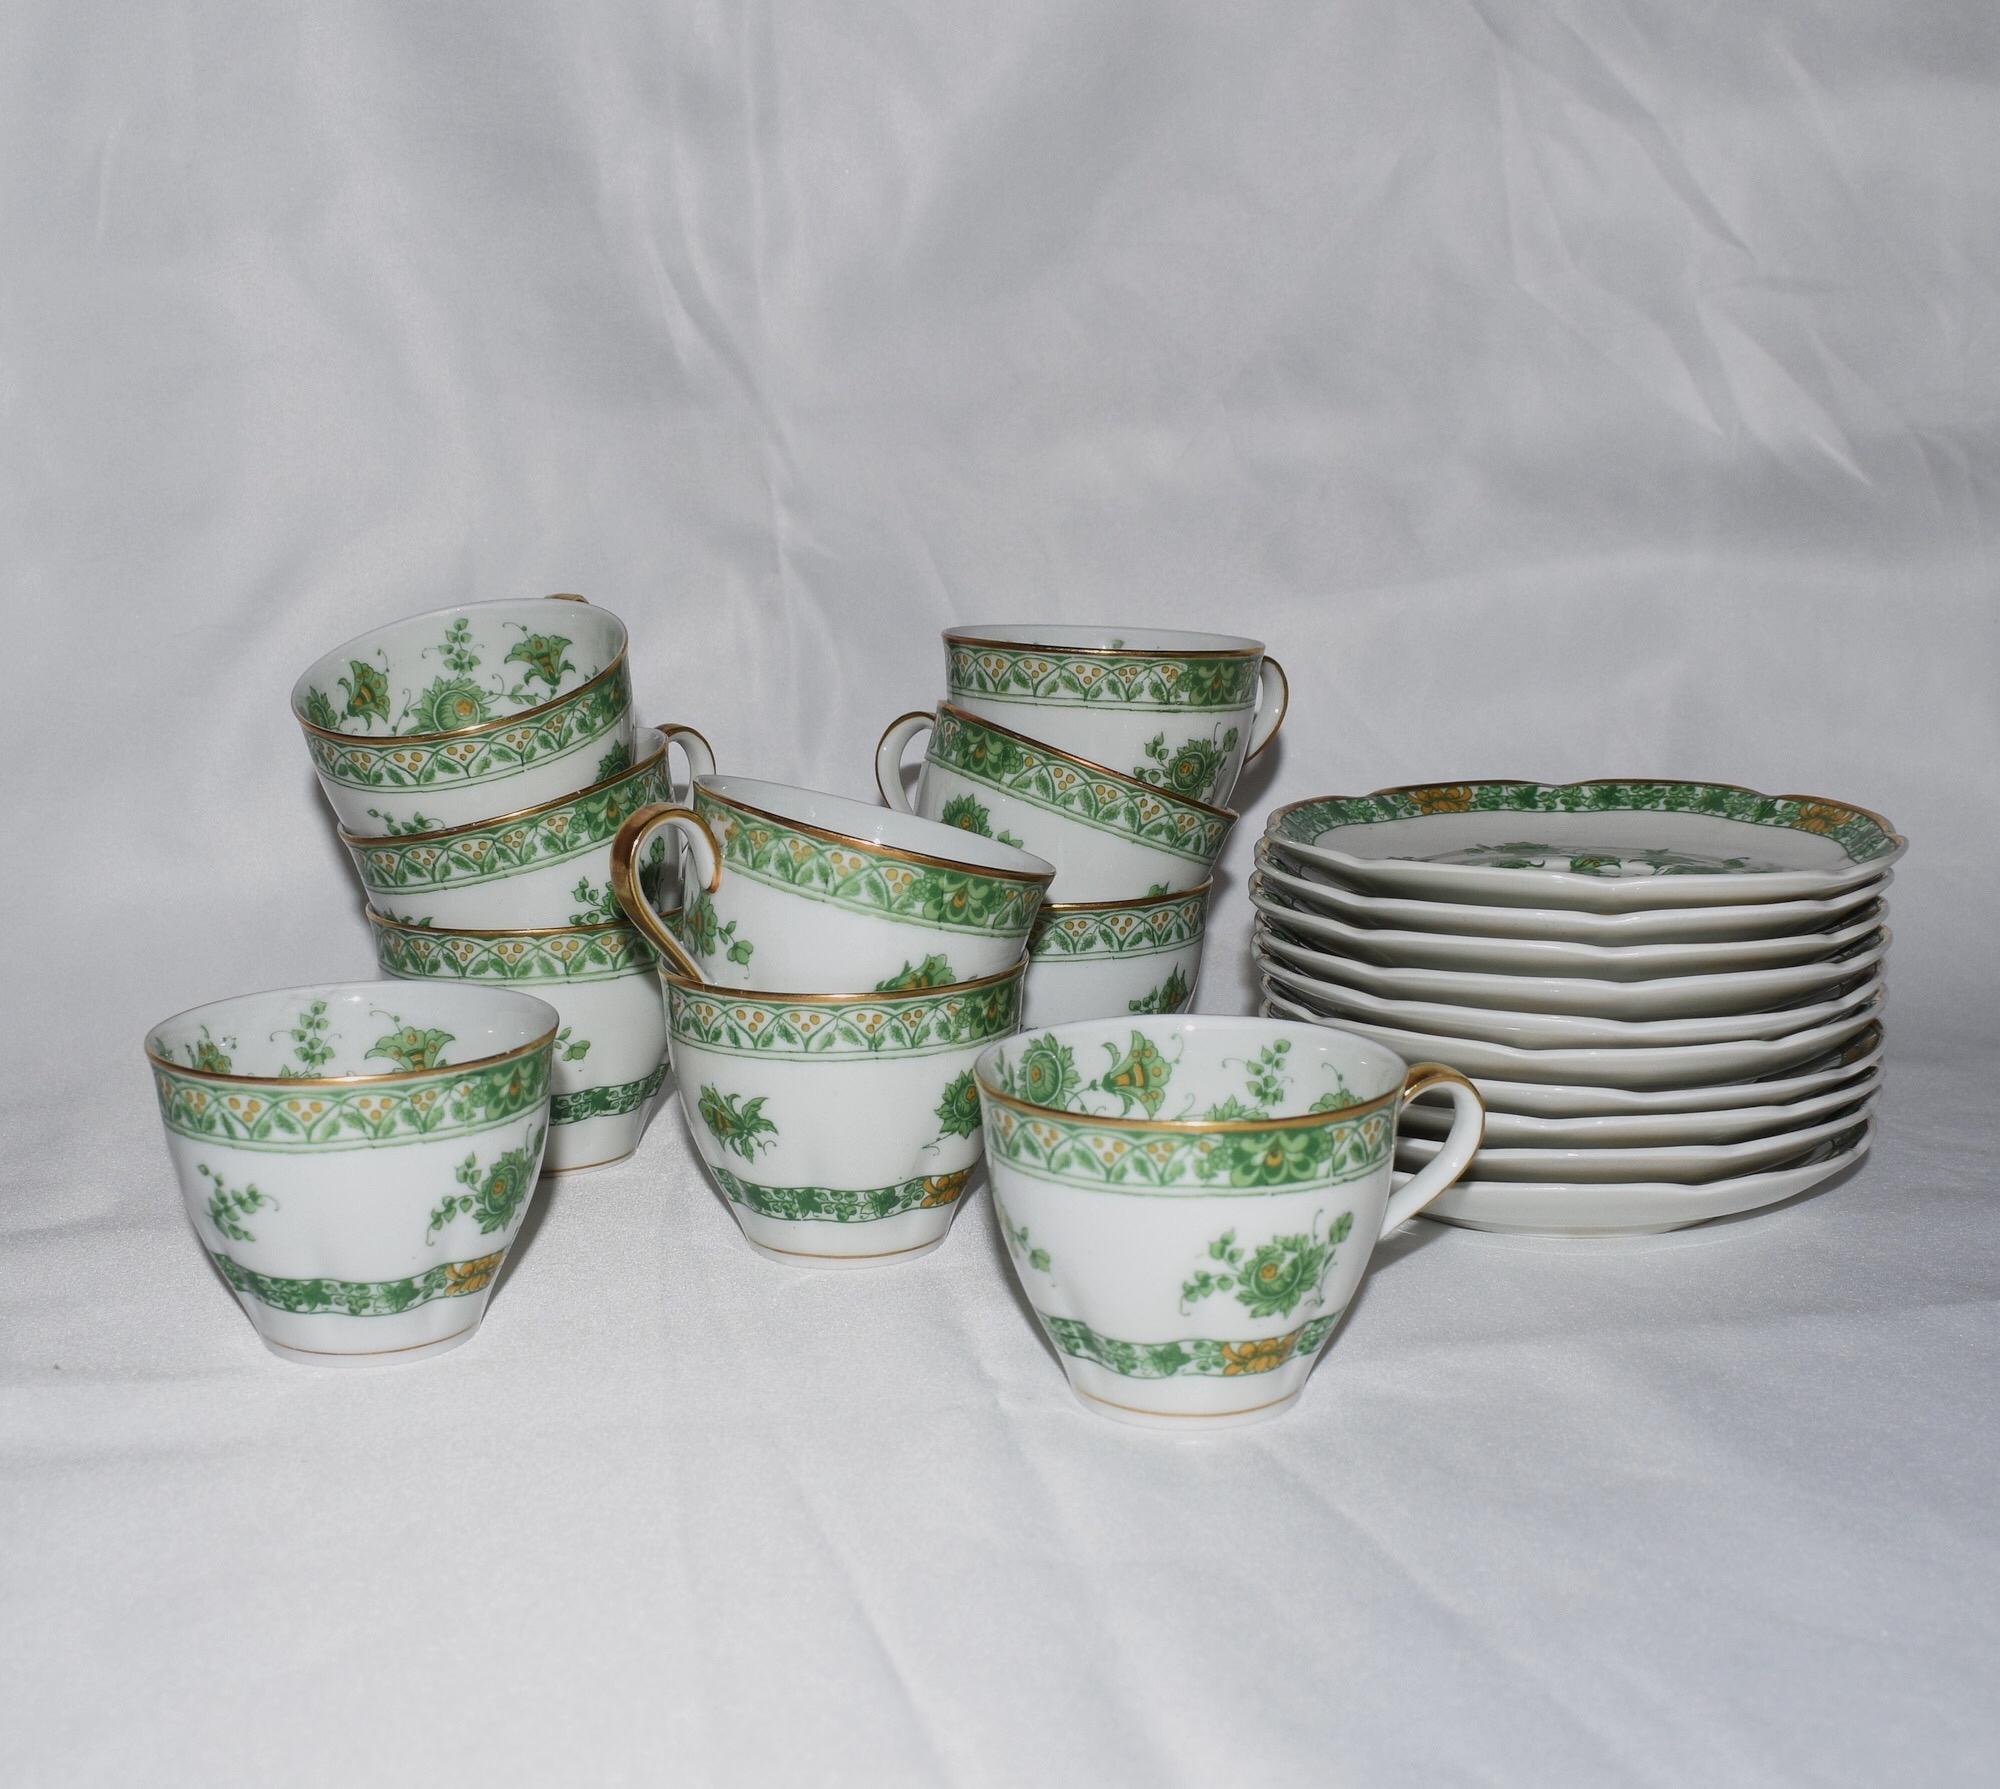 French Suite of 10 Havilland Limoges Porcelain Cashmere Green Cup and Saucer